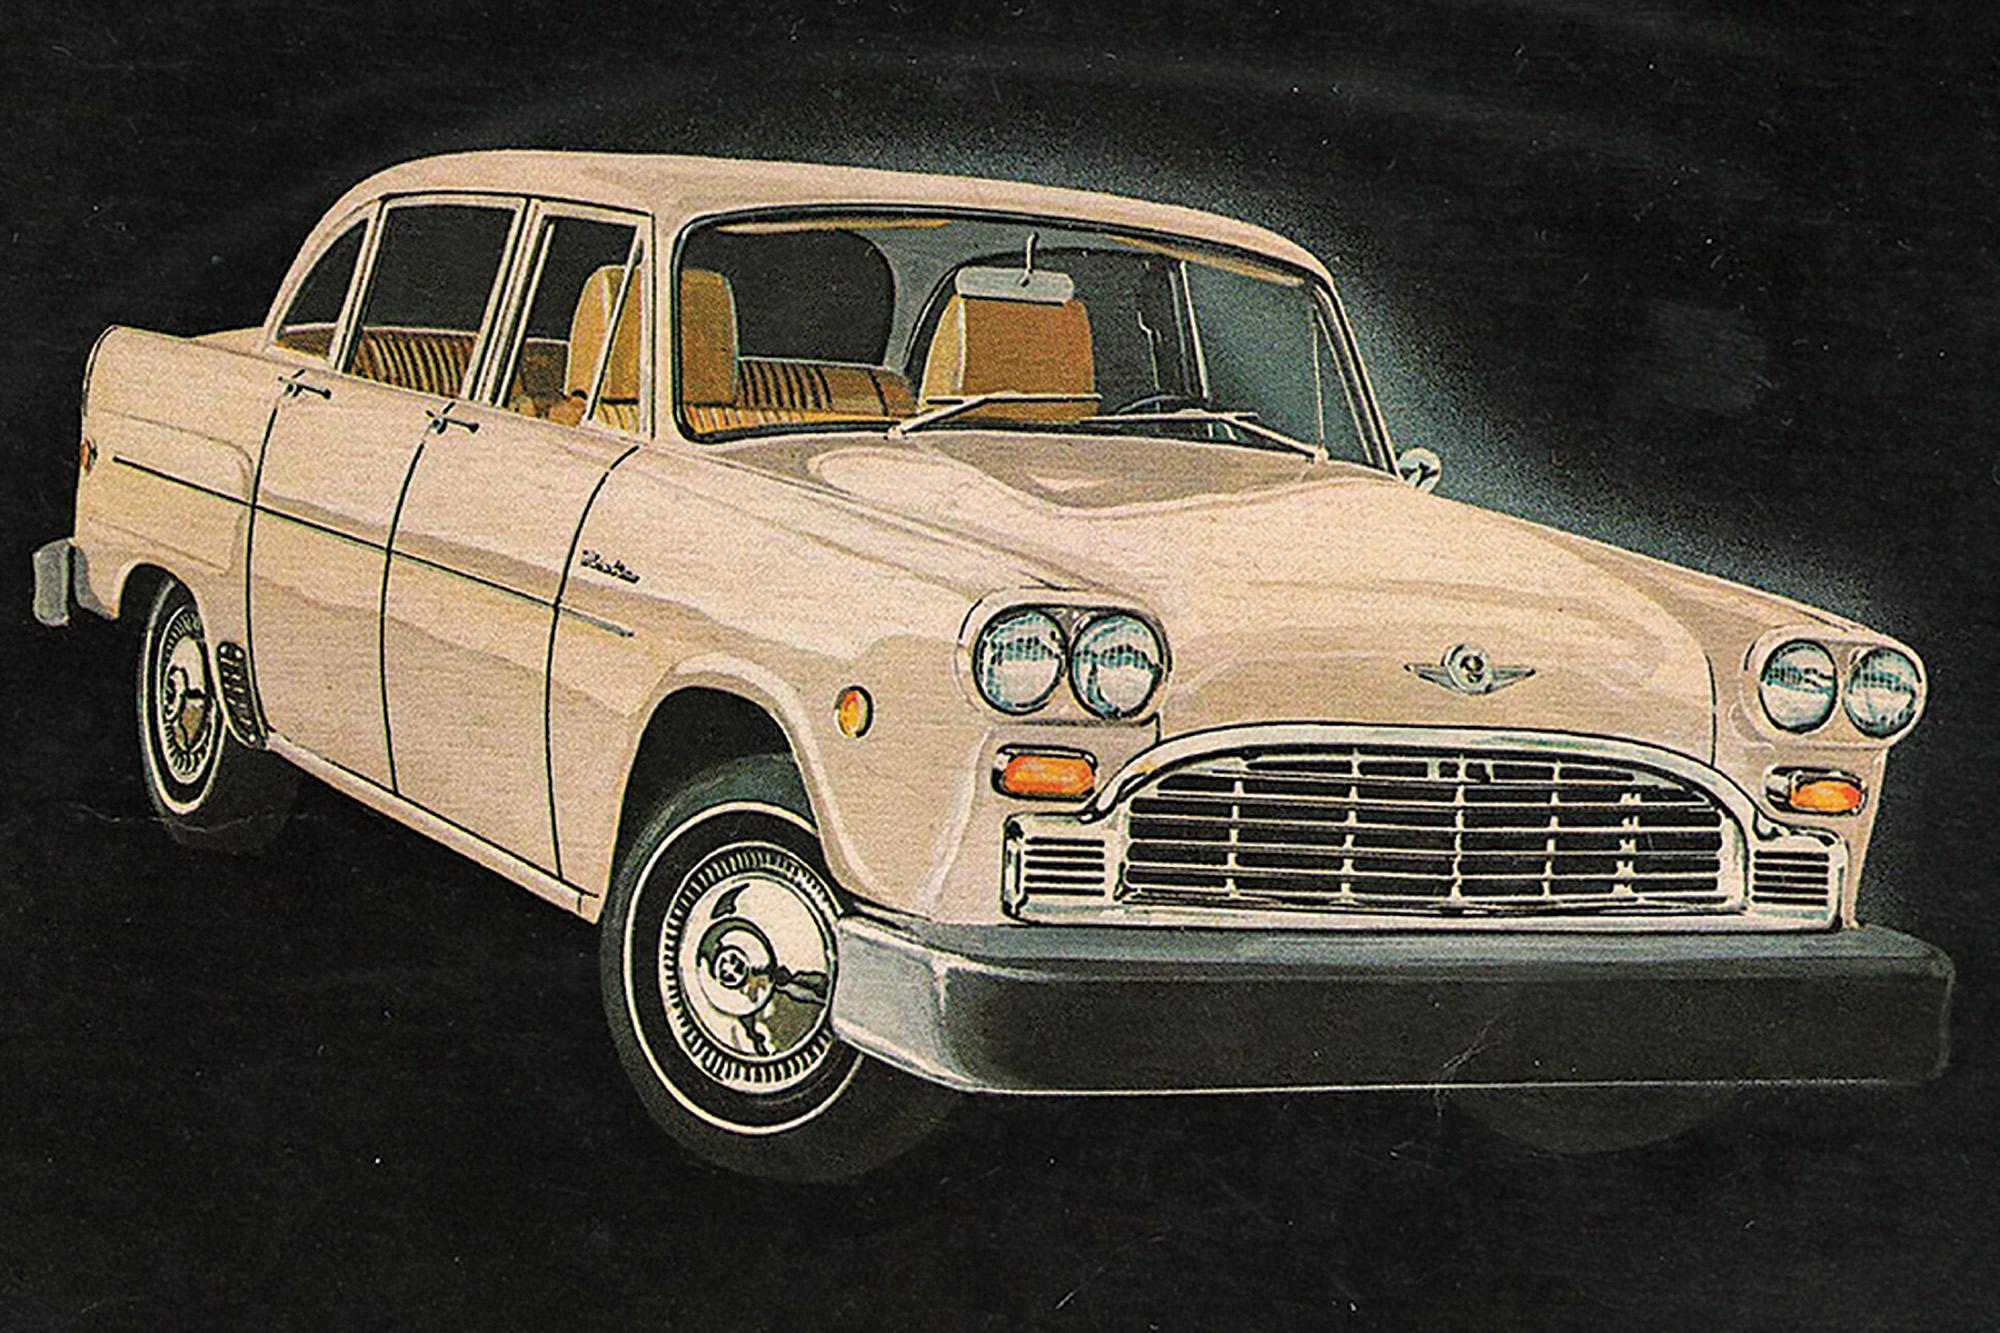 Hudson's step-down styling was revolutionary. So why didn't certain other carmakers use it?